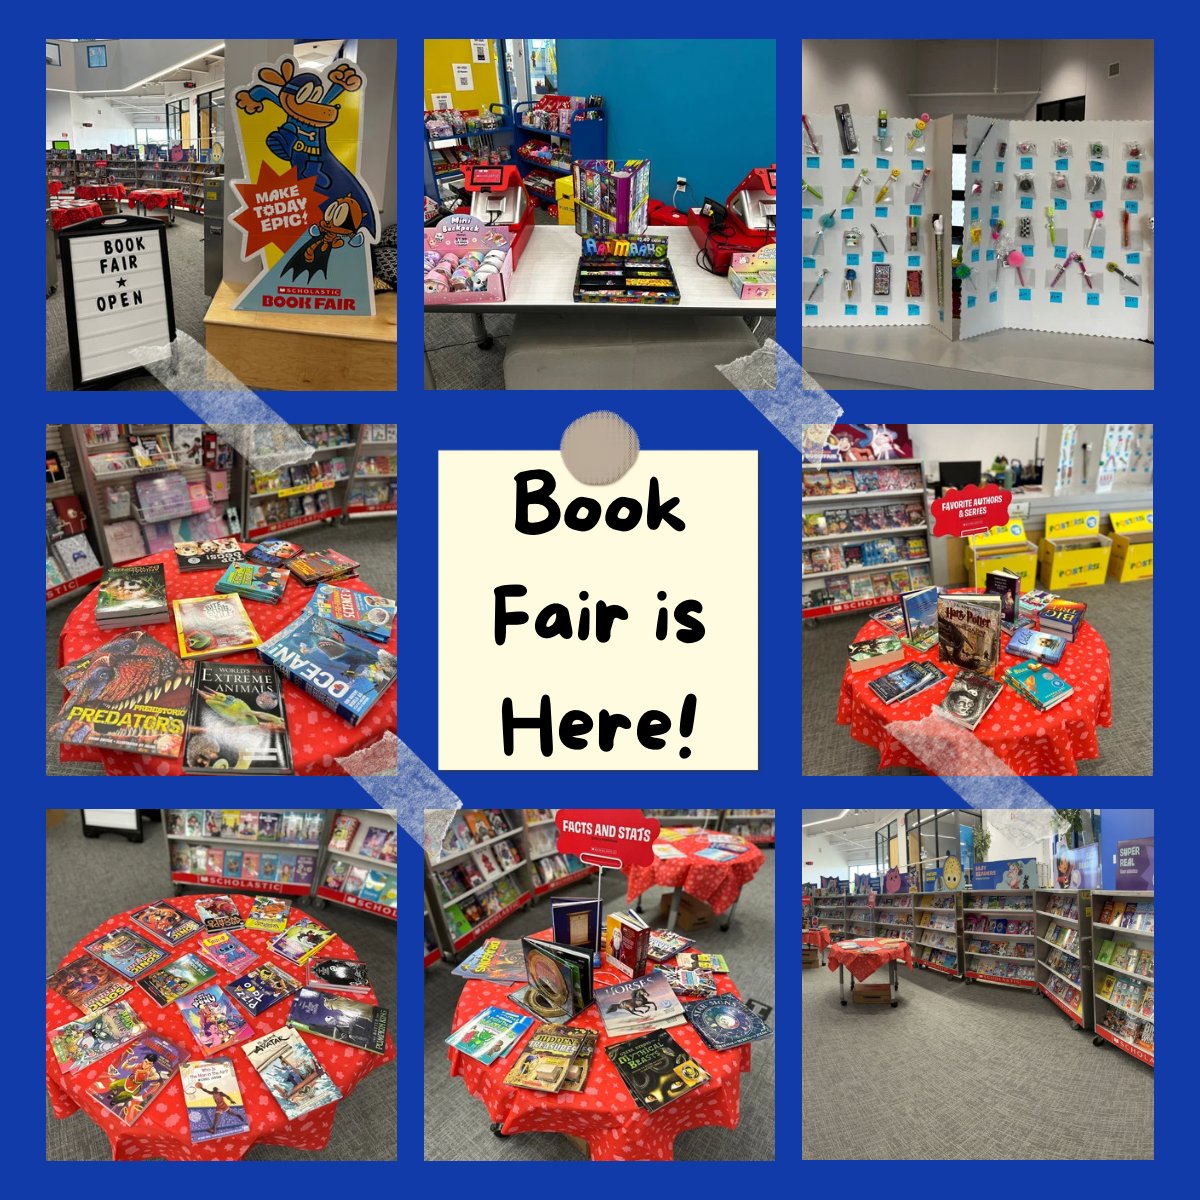 BOOK FAIR IS HERE! Helpful tips for the Book Fair: - e wallets are easy to set up online at scholastic.com/bf/svinter - if paying by cash, please send in a ziploc bag labeled with students name #raidersroar #raidersrise